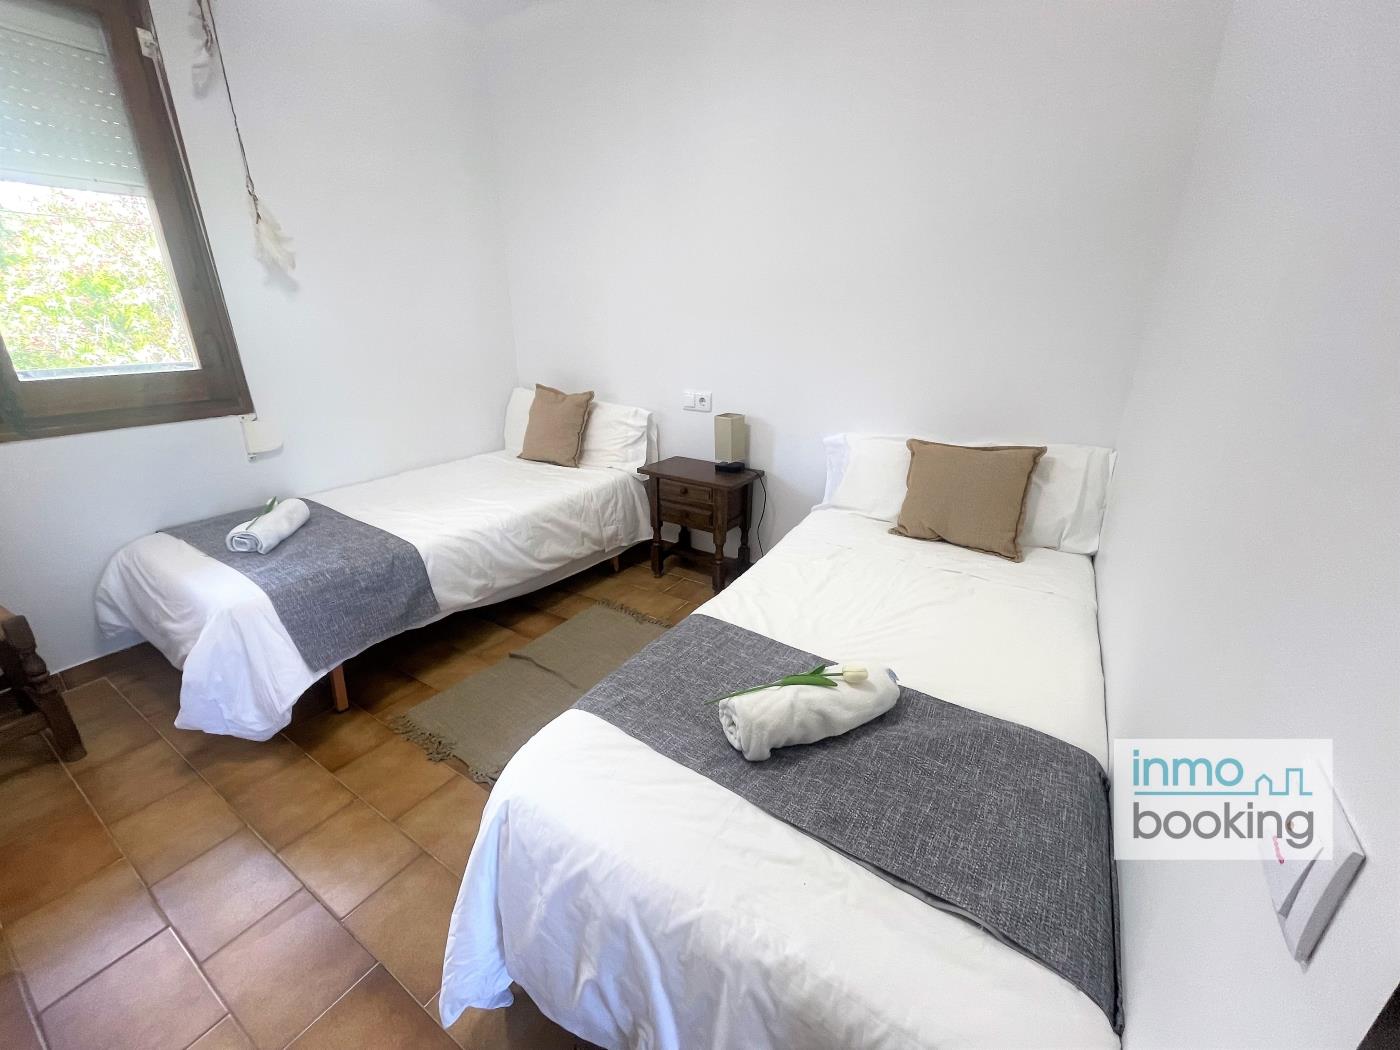 Namvan Vilafortuny, beach, air conditioning and wifi in cambrils